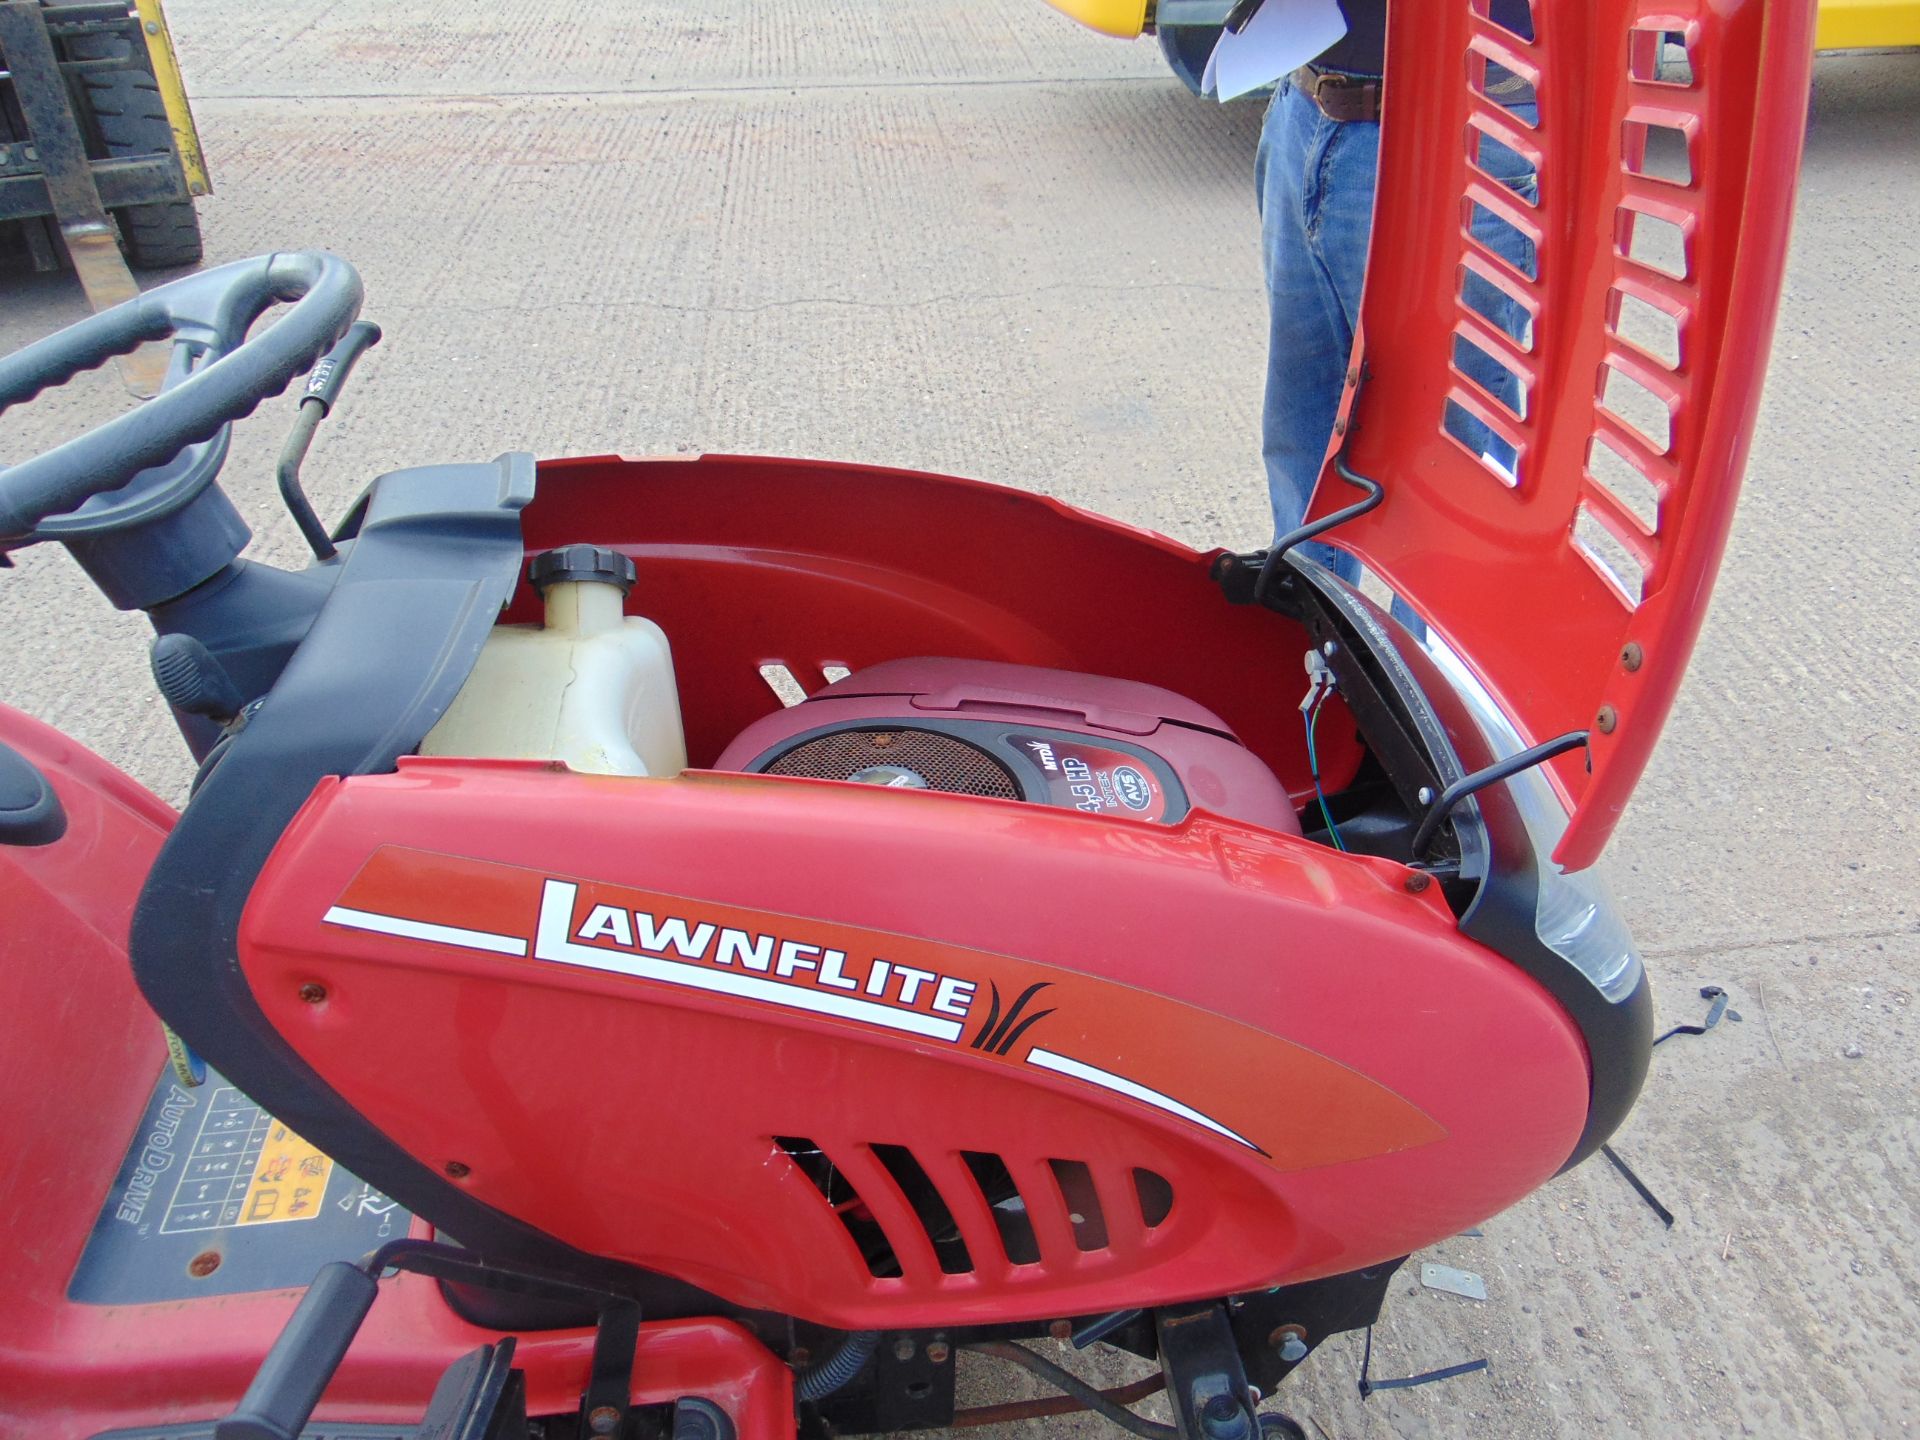 MTD LAWNFLITE 705 MOWER WITH 14.5 HP BRIGGS AND STRATTON ENGINE - Image 7 of 9